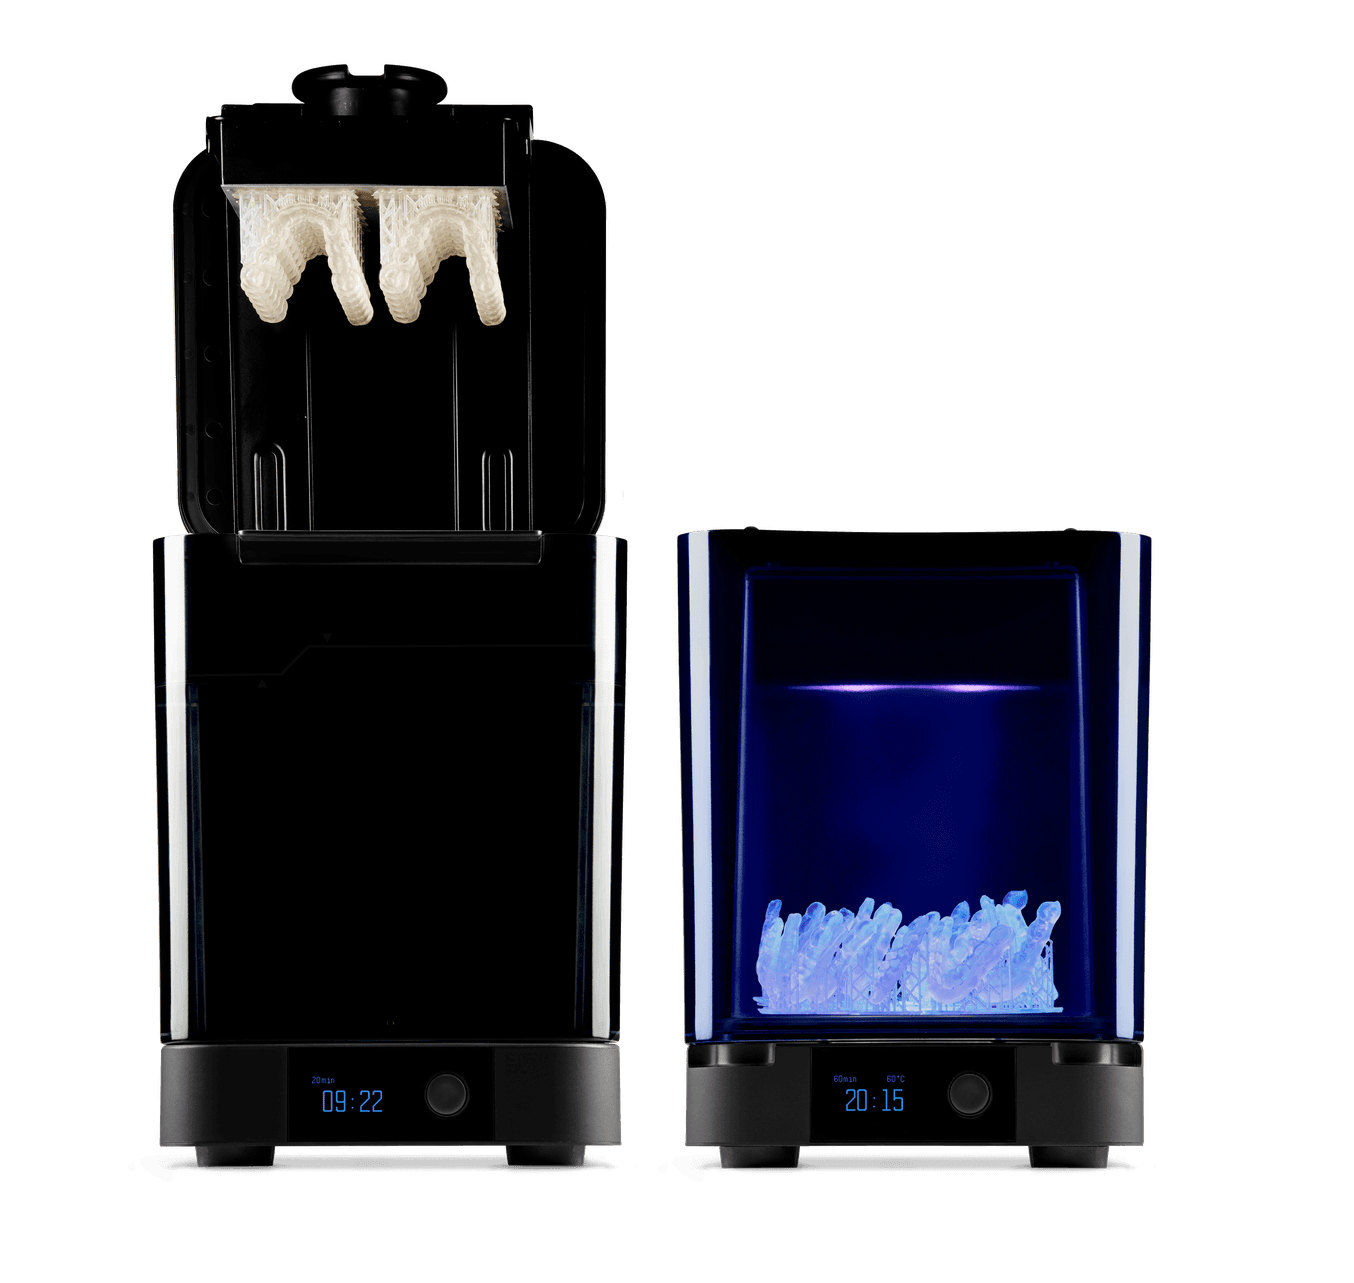 The Formlabs Form 3 3D Printer